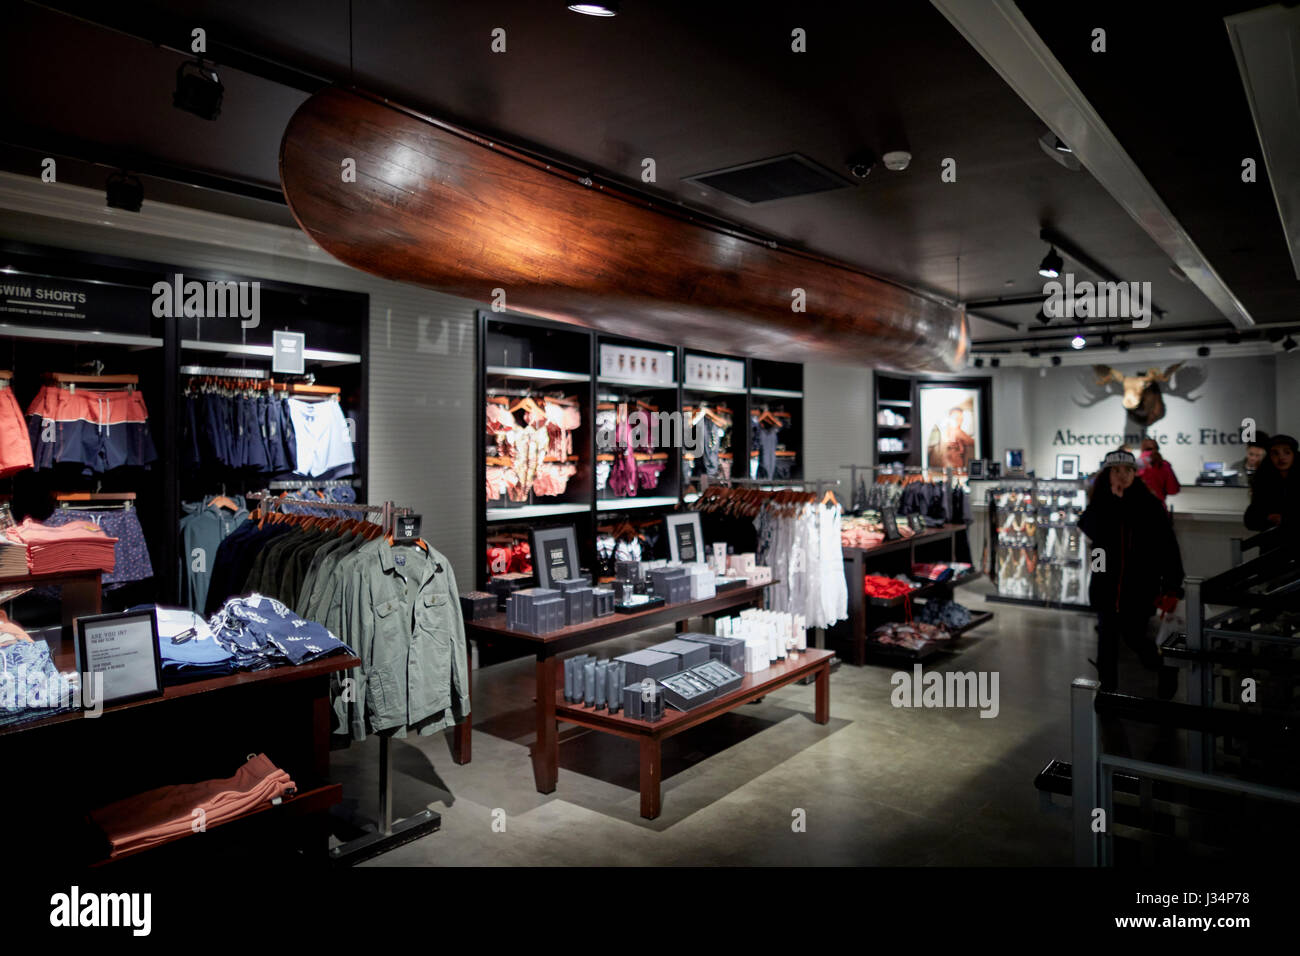 inside abercrombie and fitch store